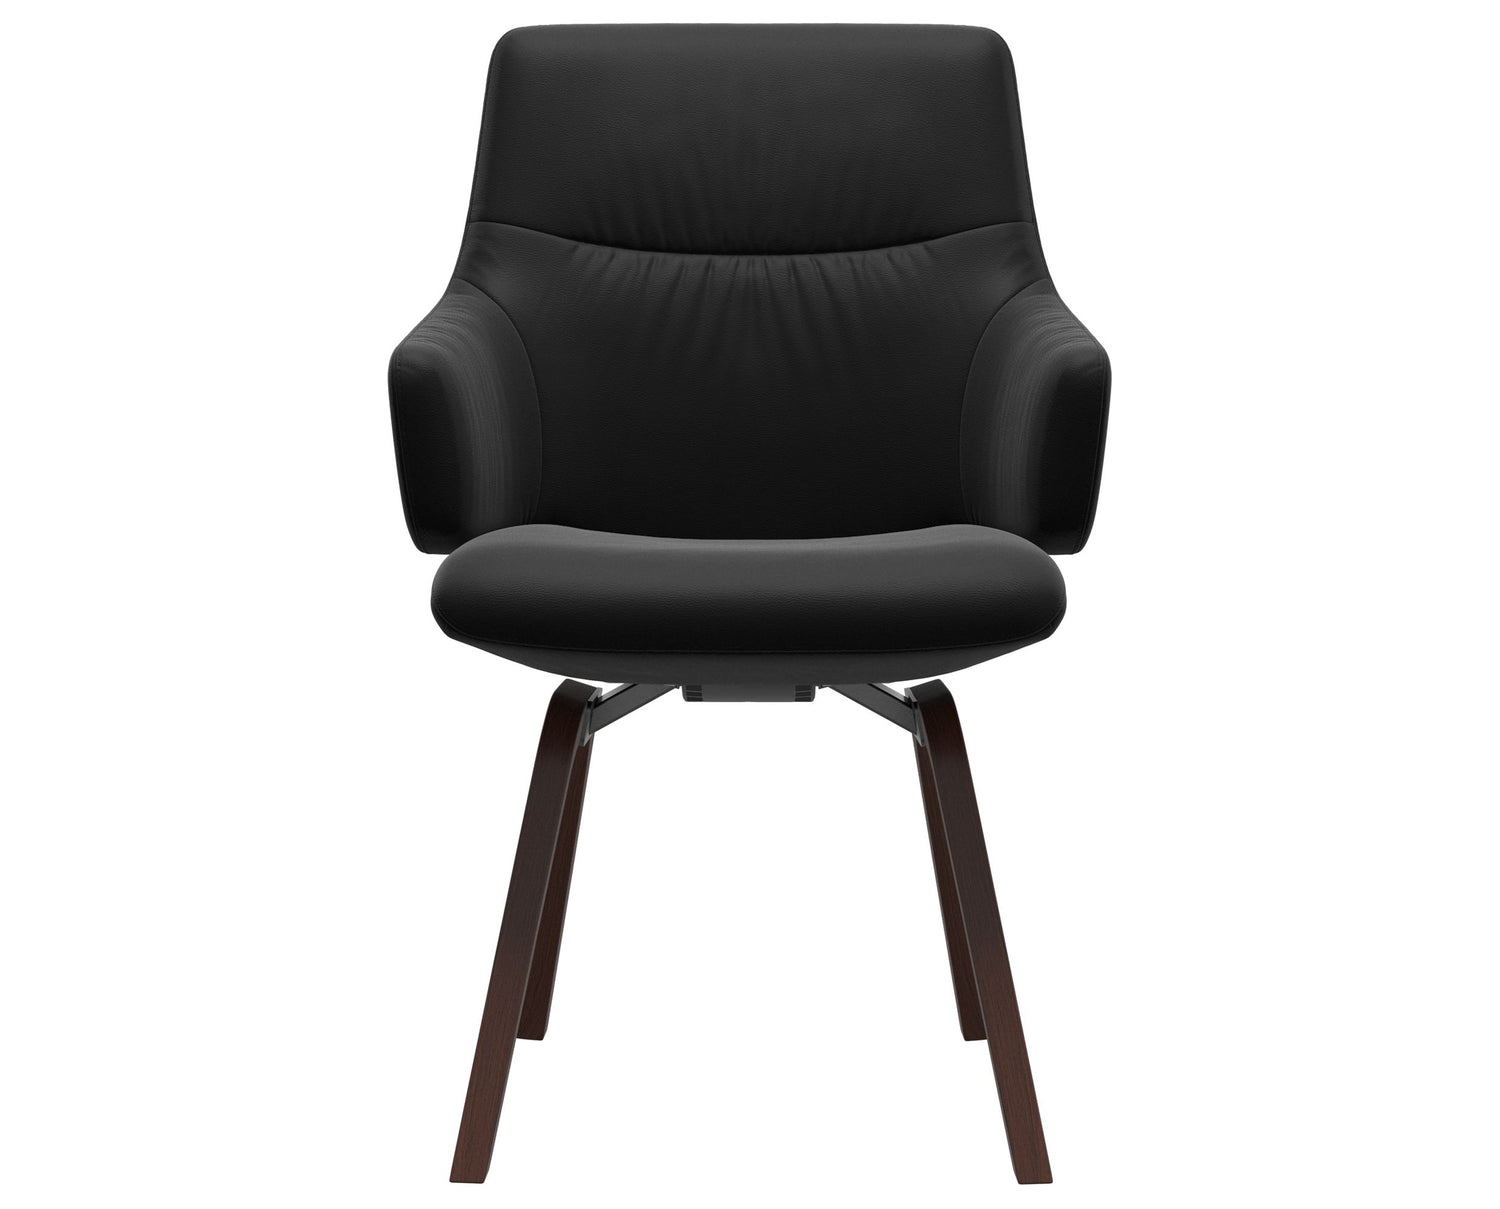 Paloma Leather Black & Walnut Base | Stressless Mint Low Back D200 Dining Chair w/Arms | Valley Ridge Furniture